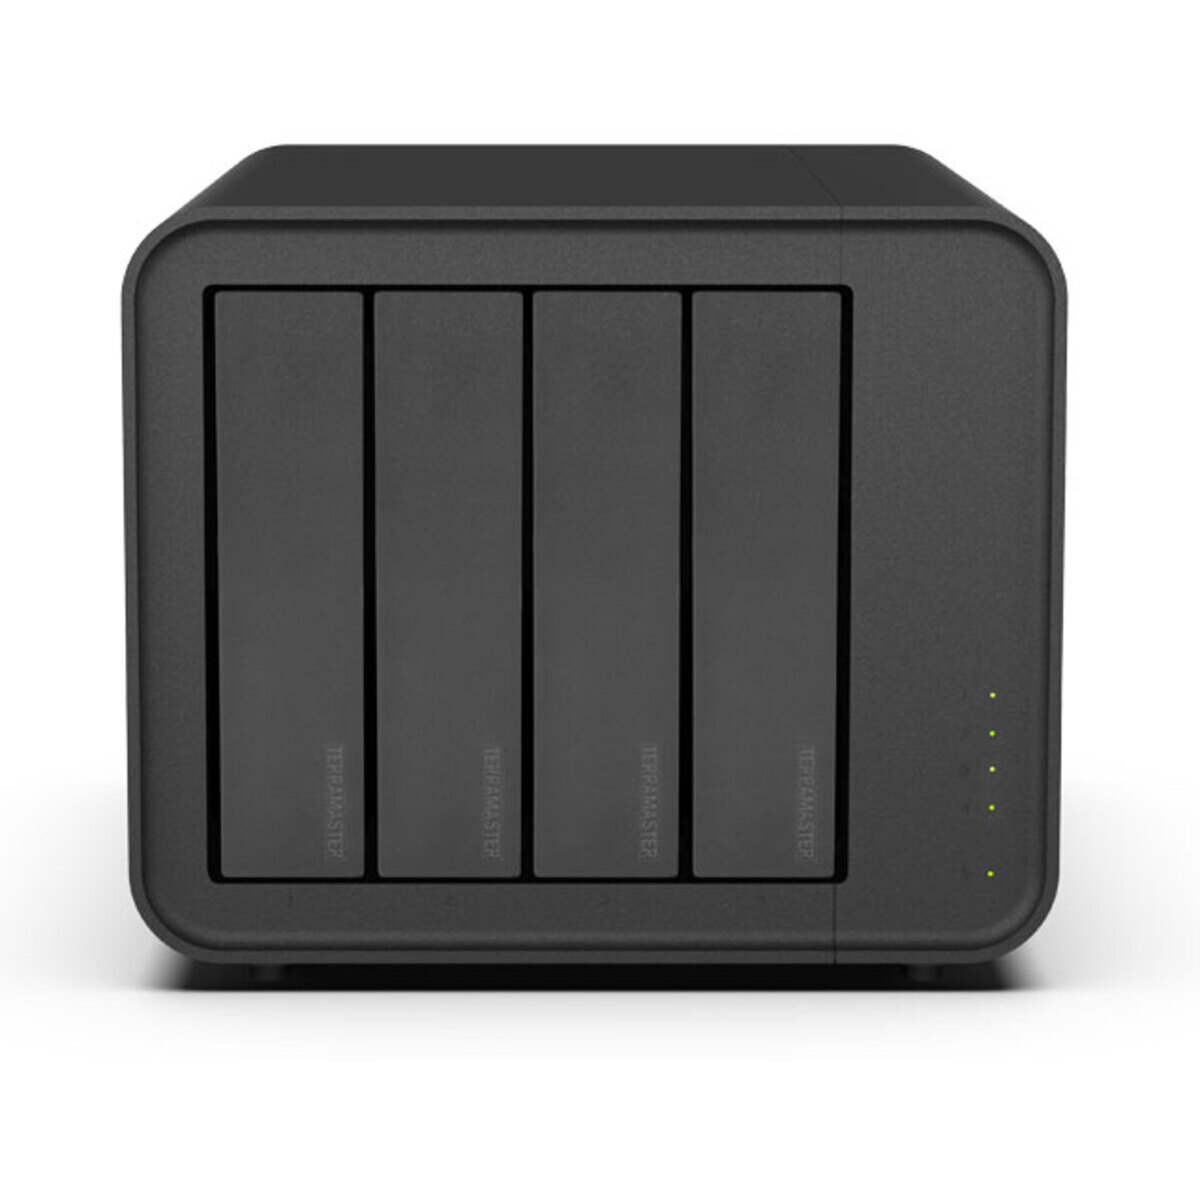 TerraMaster F4-212 20tb 4-Bay Desktop Personal / Basic Home / Small Office NAS - Network Attached Storage Device 2x10tb Seagate EXOS X18 ST10000NM018G 3.5 7200rpm SATA 6Gb/s HDD ENTERPRISE Class Drives Installed - Burn-In Tested F4-212